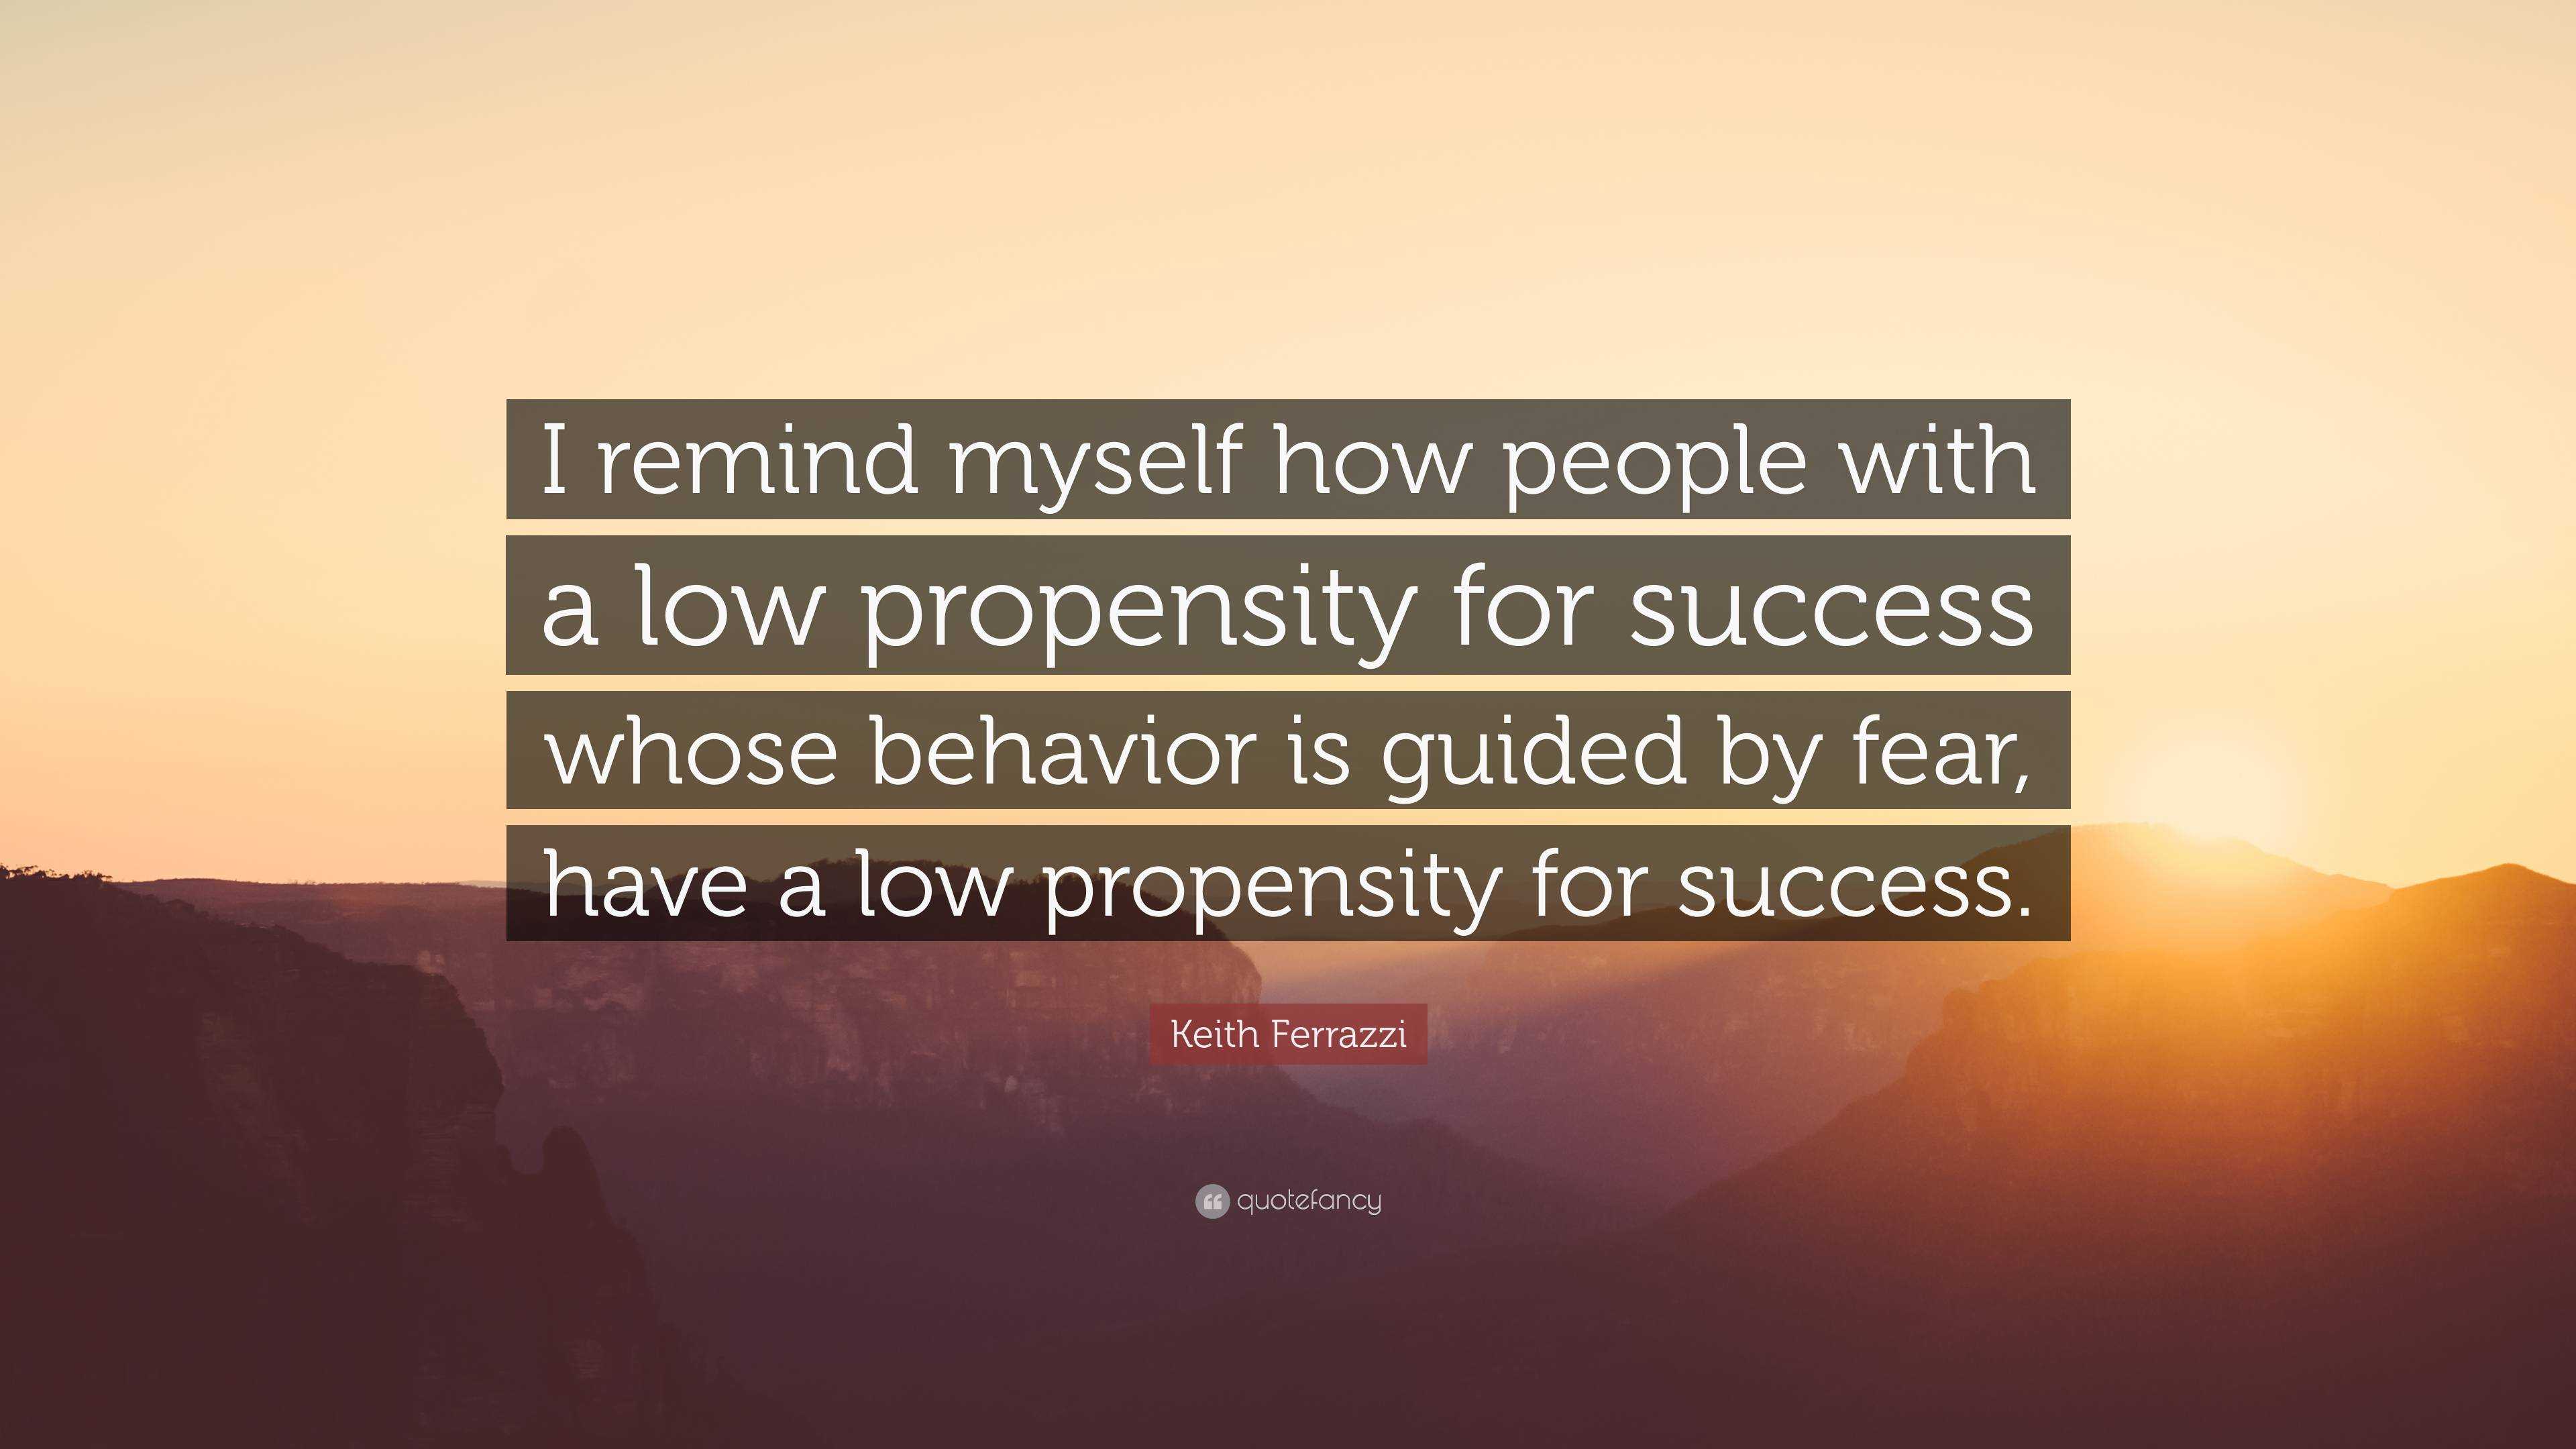 Keith Ferrazzi Quote: “I remind myself how people with a low propensity ...